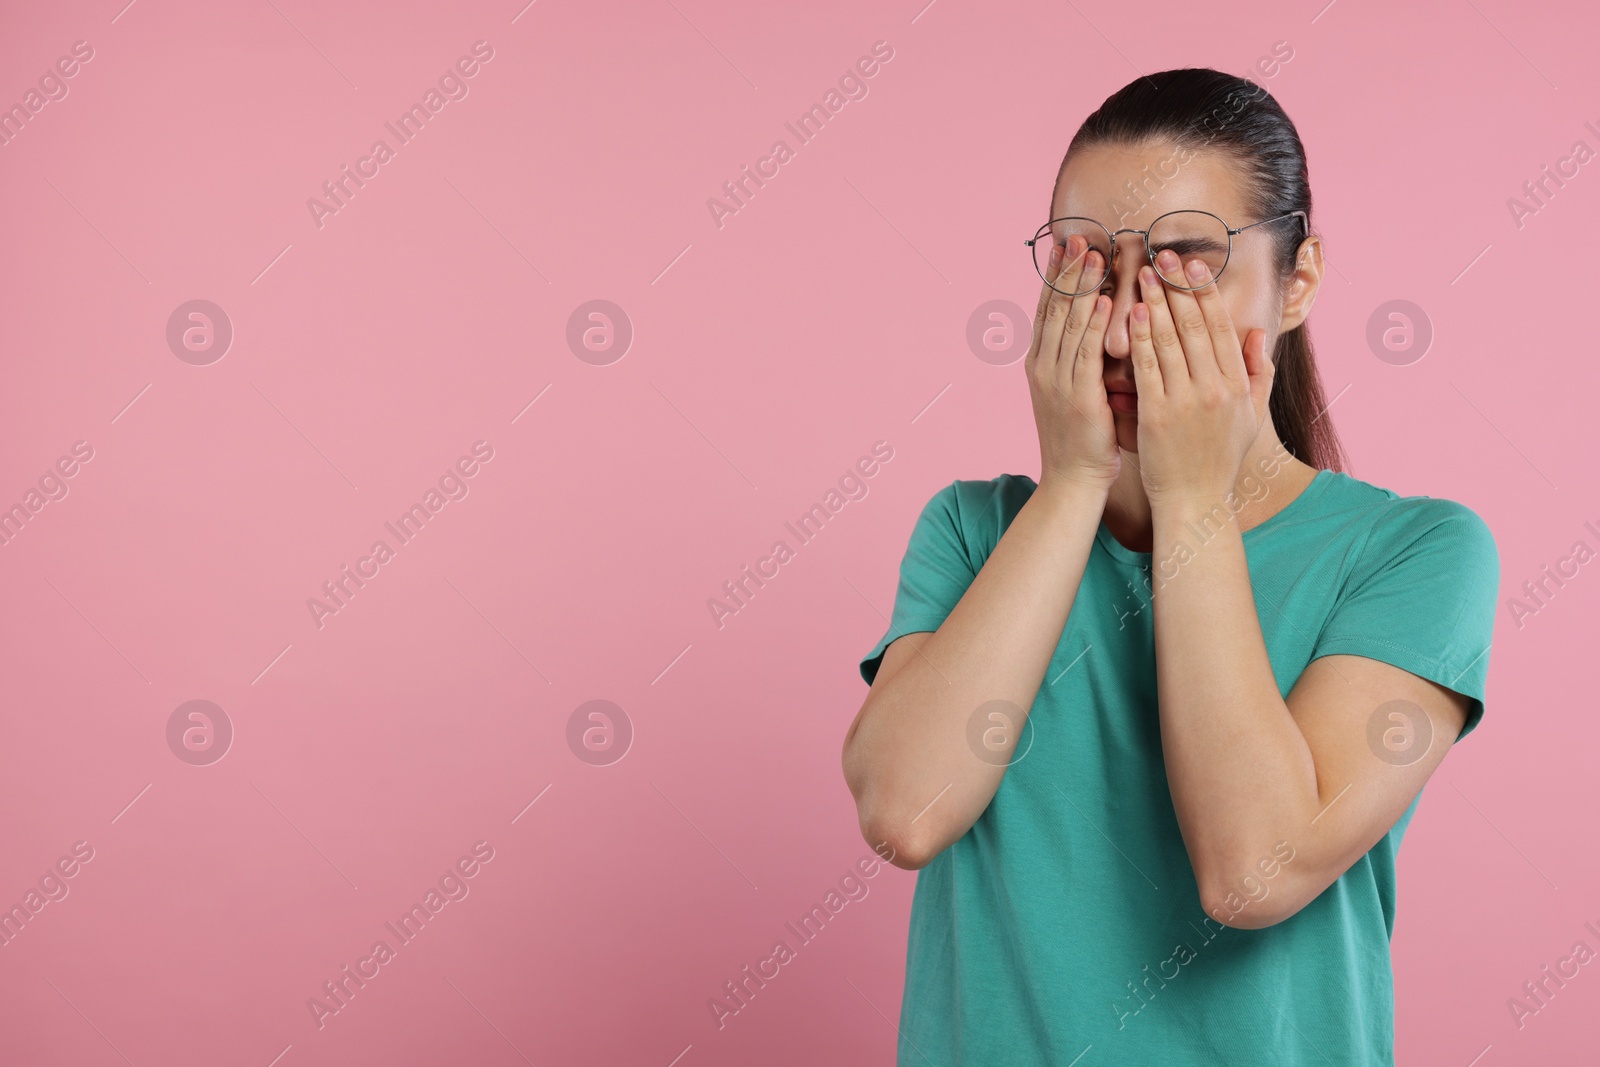 Photo of Resentful woman covering face with hands on pink background. Space for text